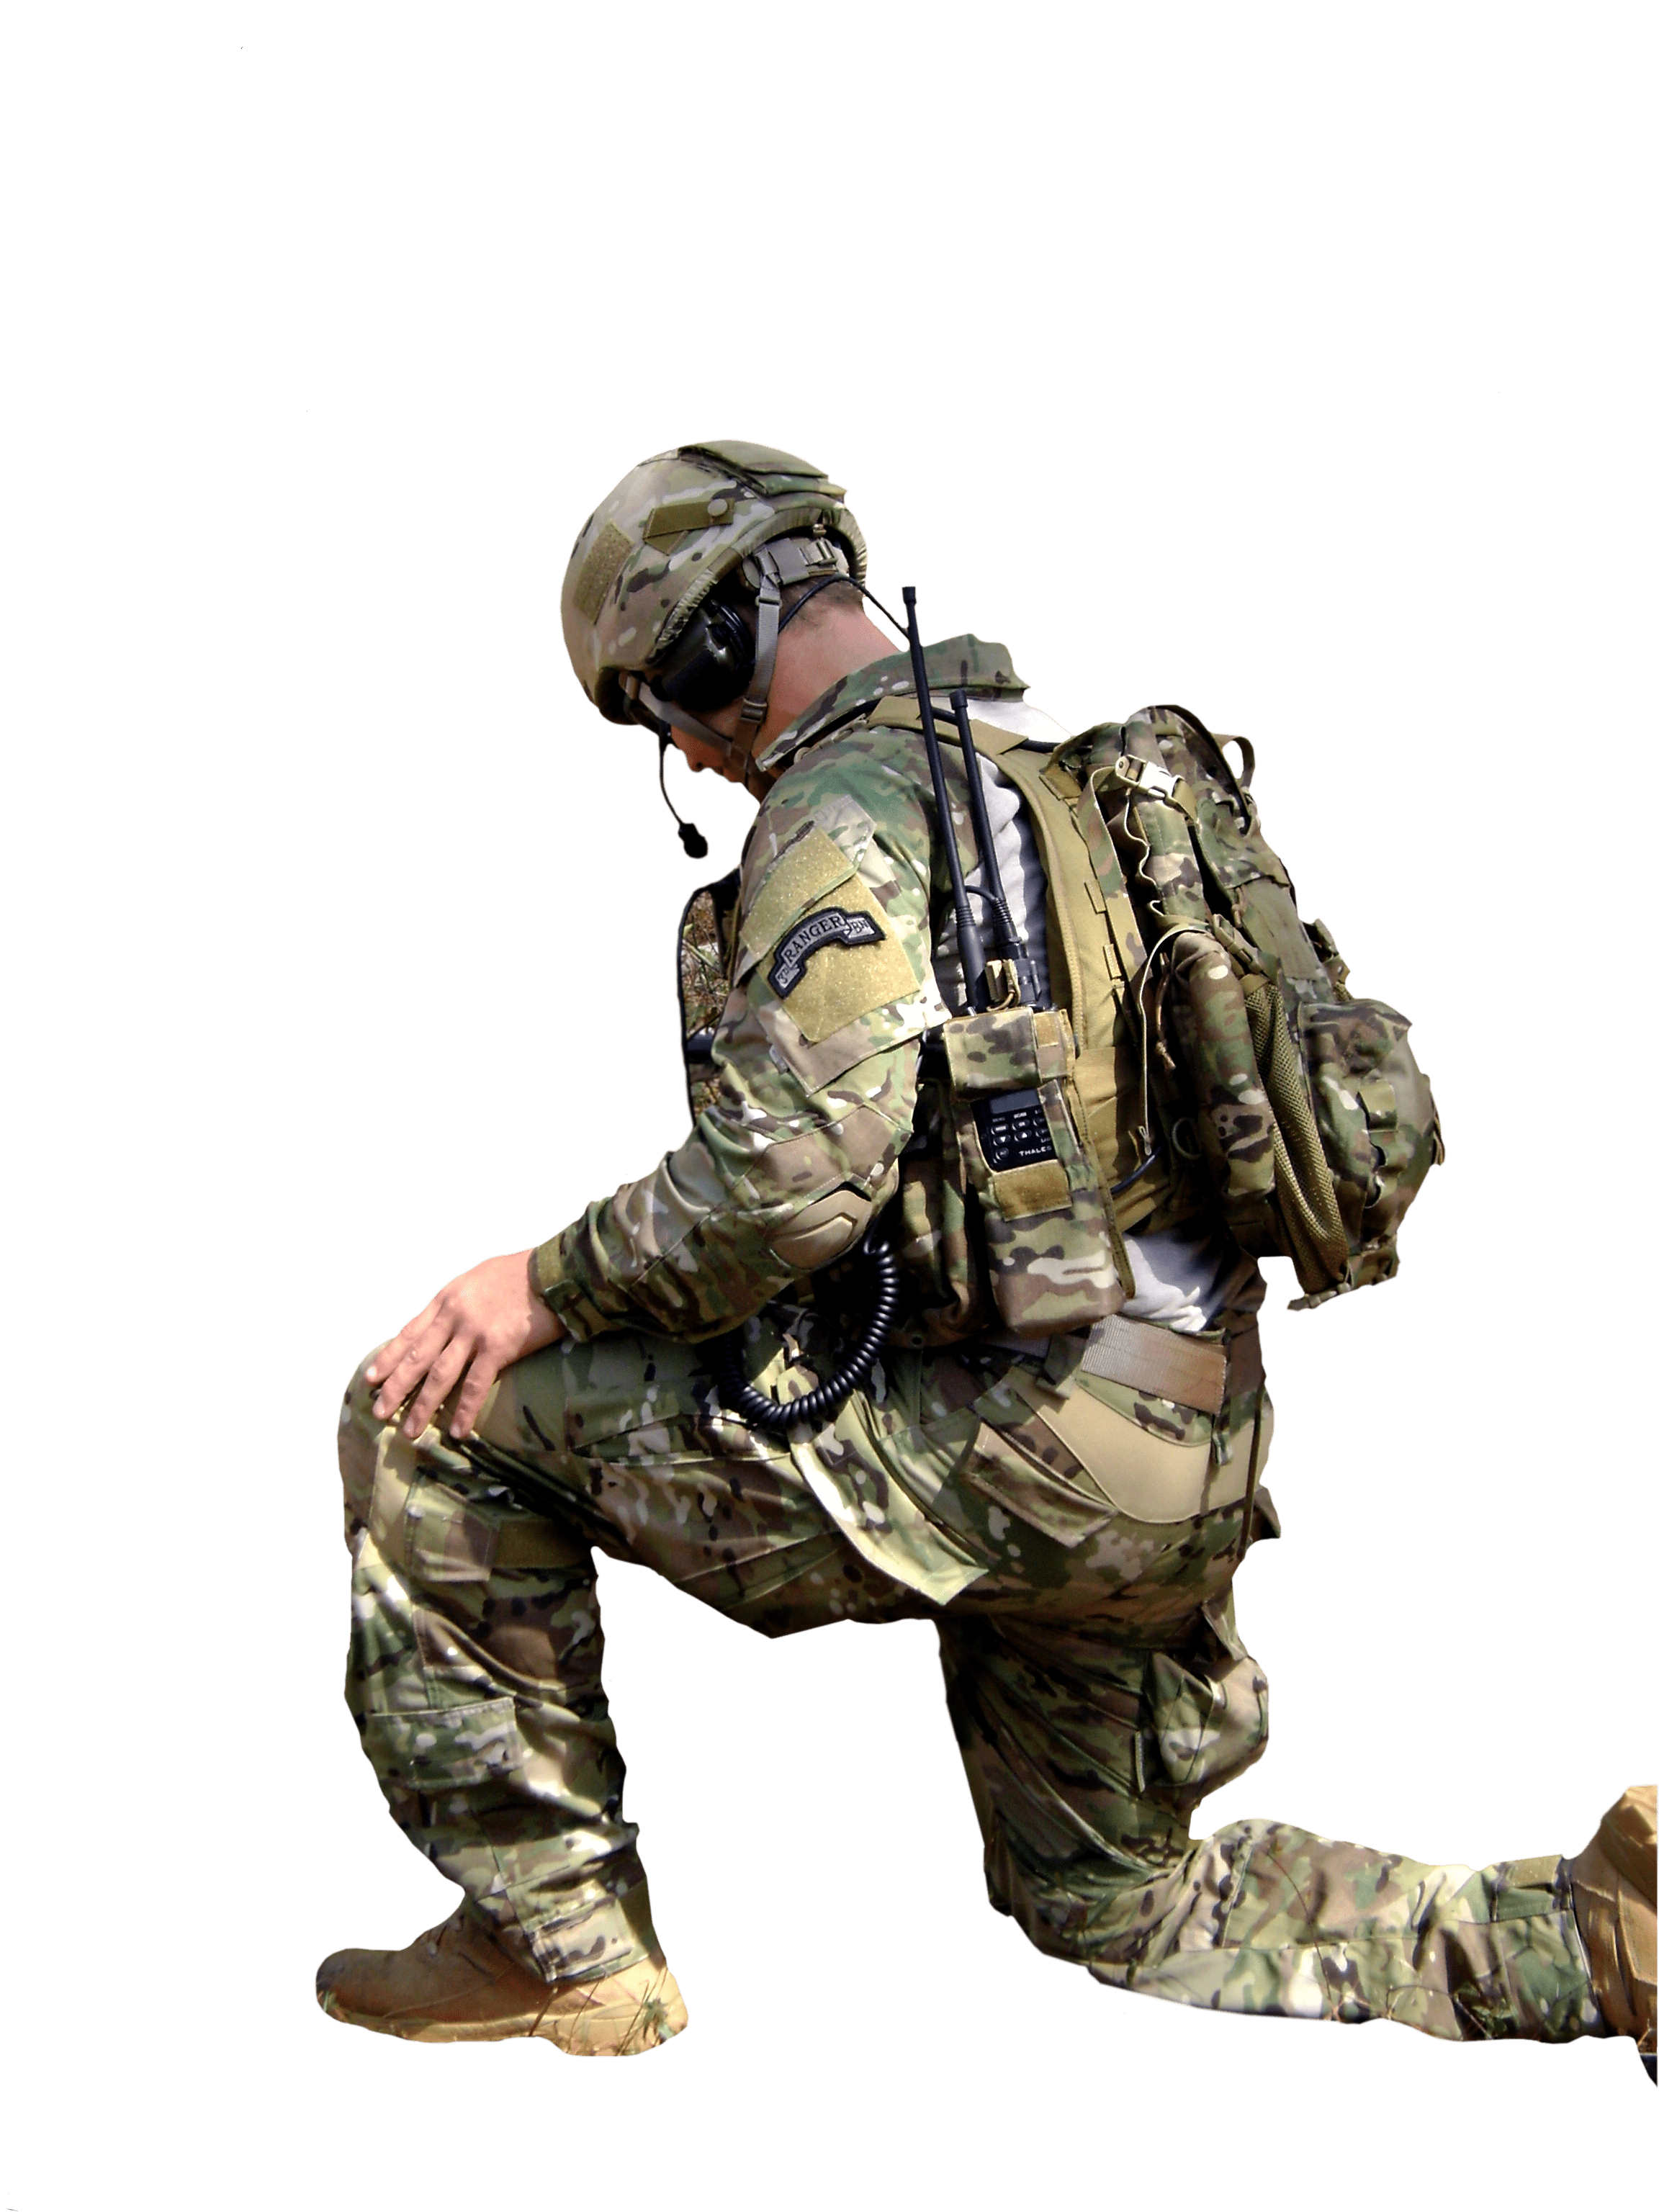 The Soldier Worn Integrated Power Equipment System (SWIPES™) is an advanced power and data distribution system and the next phase in creating a fully networked warfighter. Through the use of a cable management system contained inside an armor system or ruck, SWIPES™ utilizes a central hub to distribute power from commonly used military batteries through a trickle charge to most individually worn equipment. This allows for the most efficient use of power and decreases the weight a warfighter must carry by virtually eliminating the need to carry spare batteries. In addition, the hub can also deliver data from the individually worn equipment to an end user device allowing the user to view all of their networked assets in one place such as a tablet or smartphone.